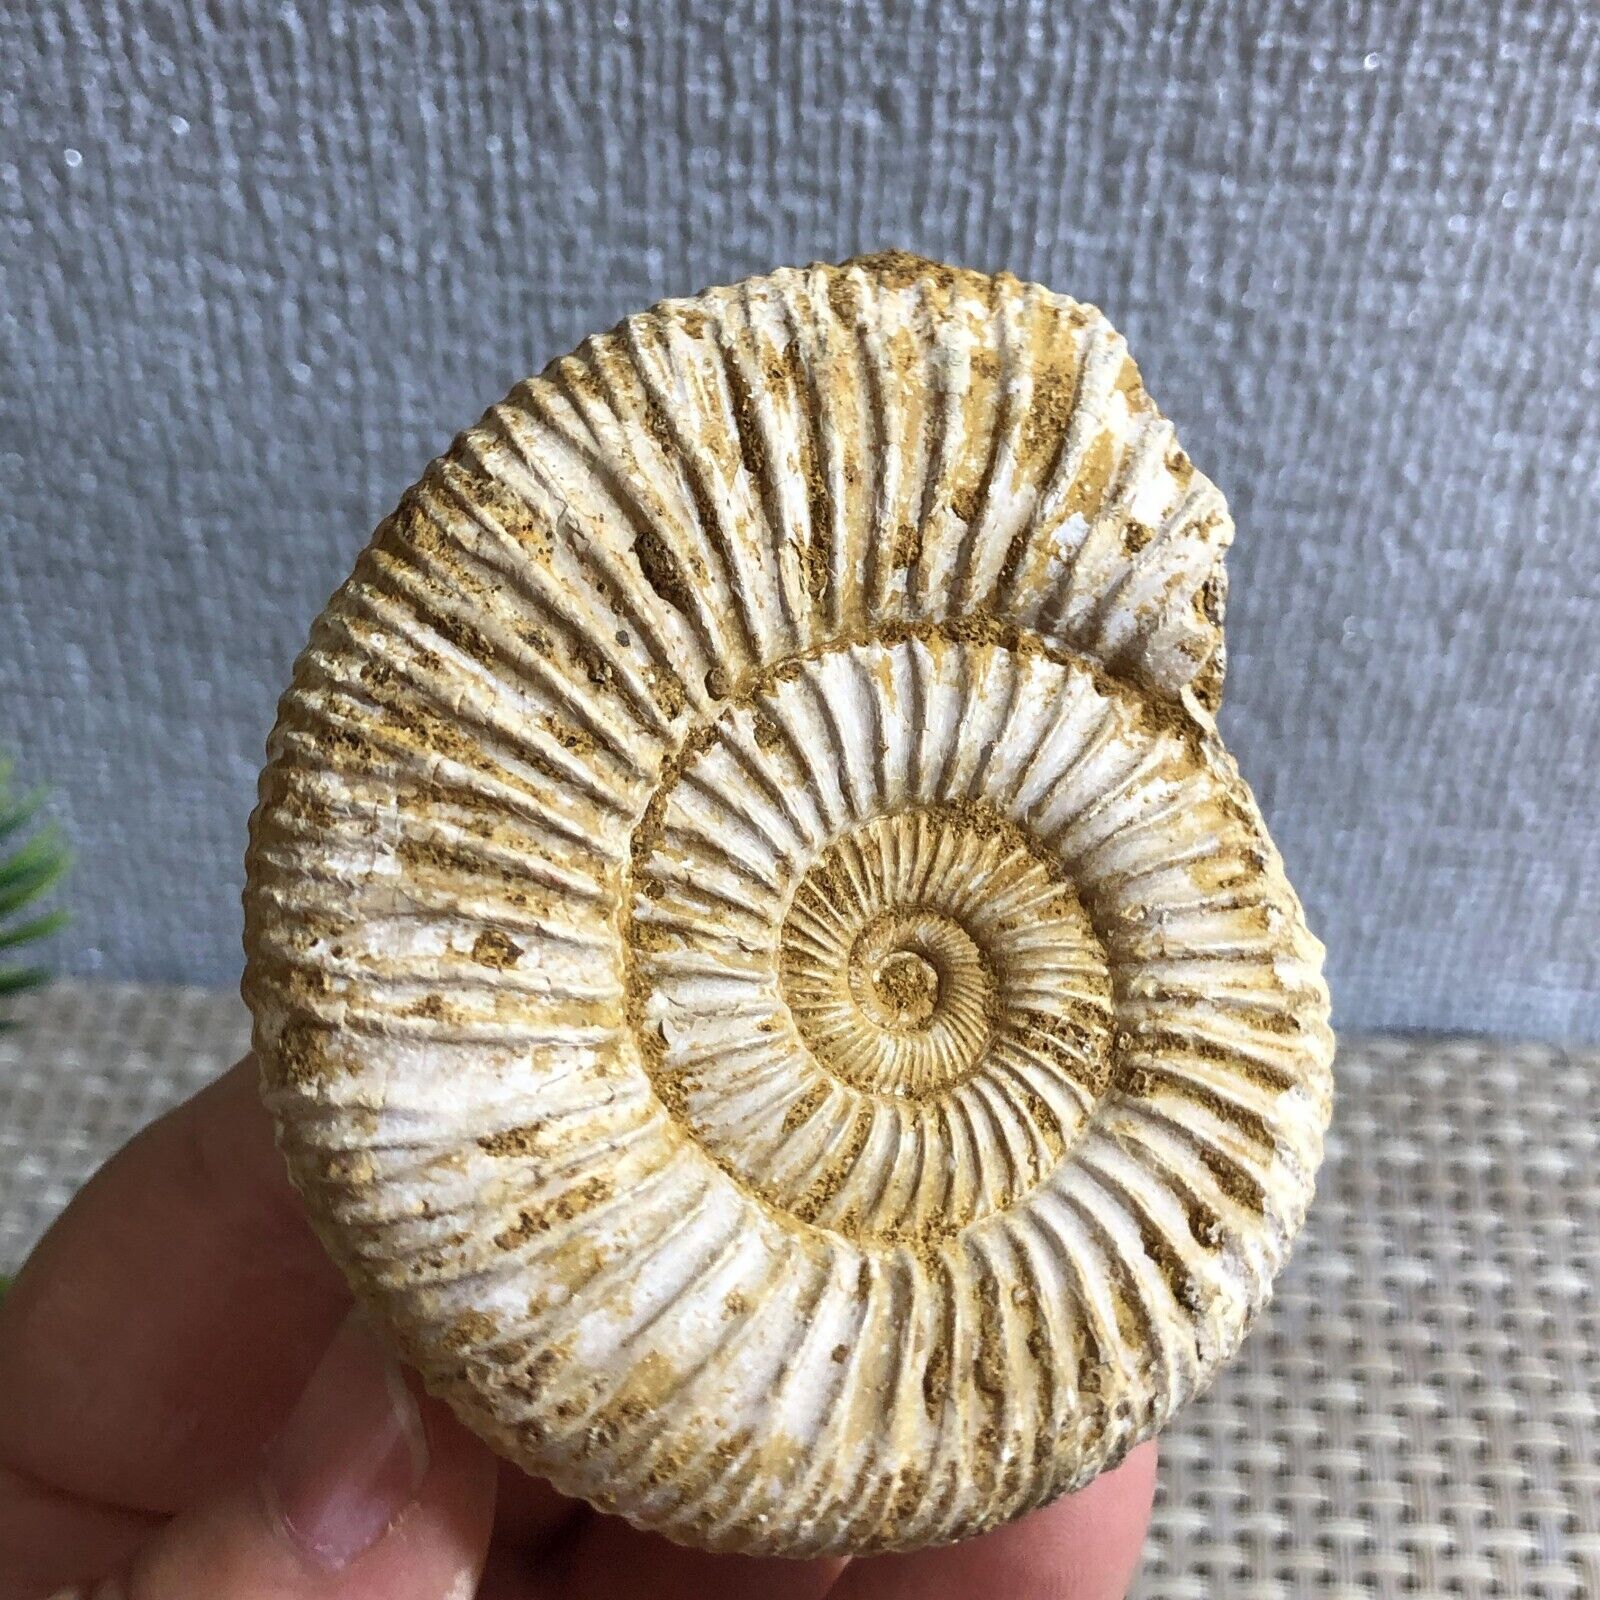 Rare natural rough white conch fossils and ammonite 97g d151